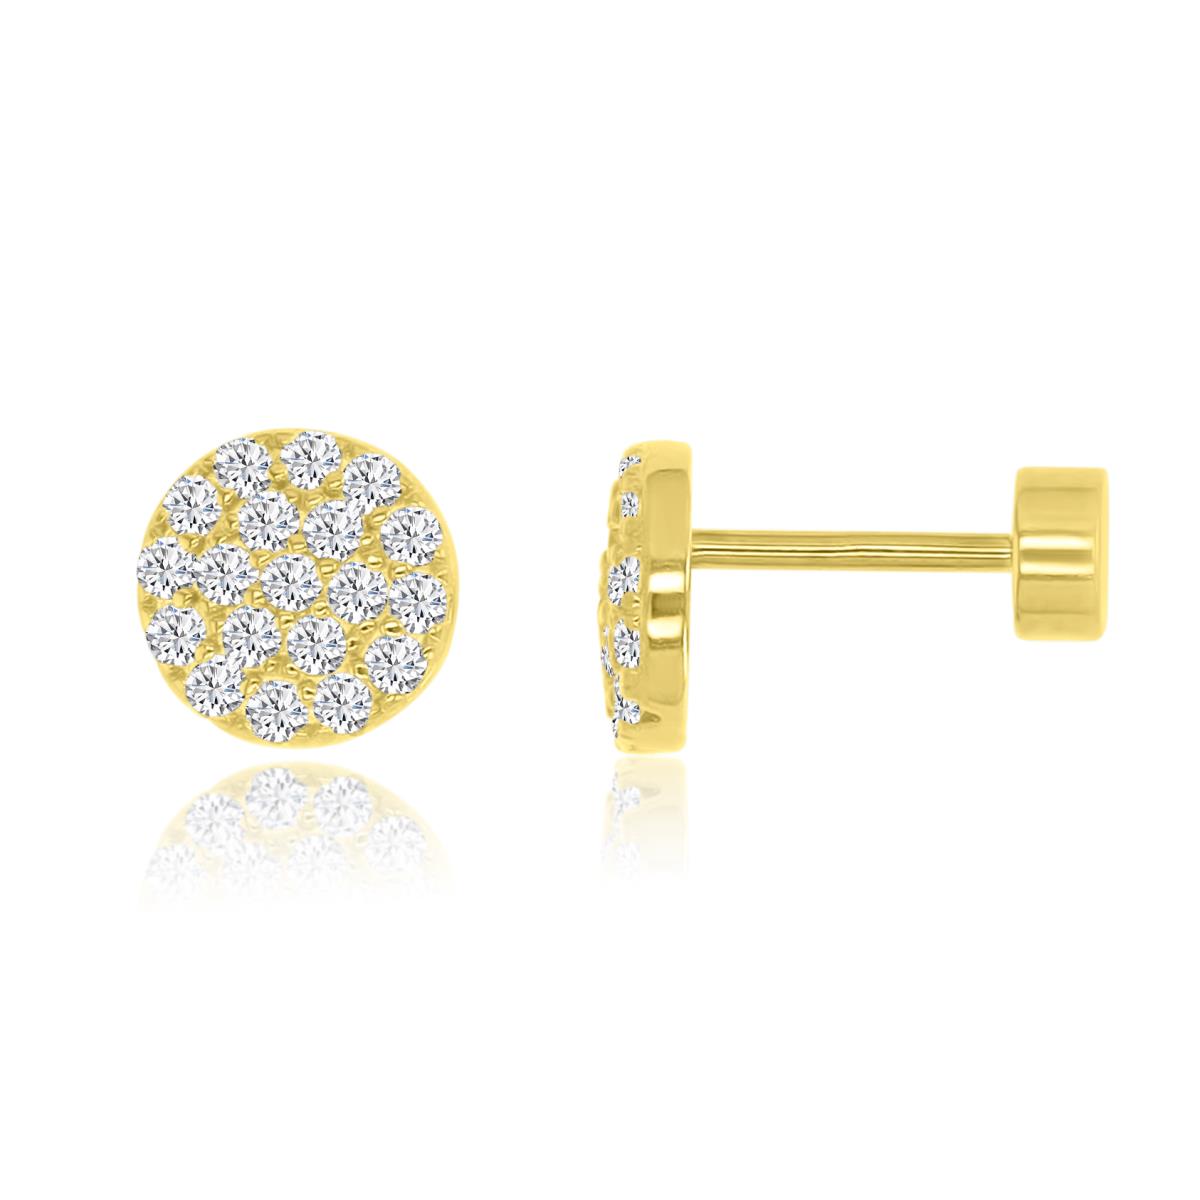 14K Yellow Gold 7x7mm Micropave CZ Round Flat Back Stud Earrings